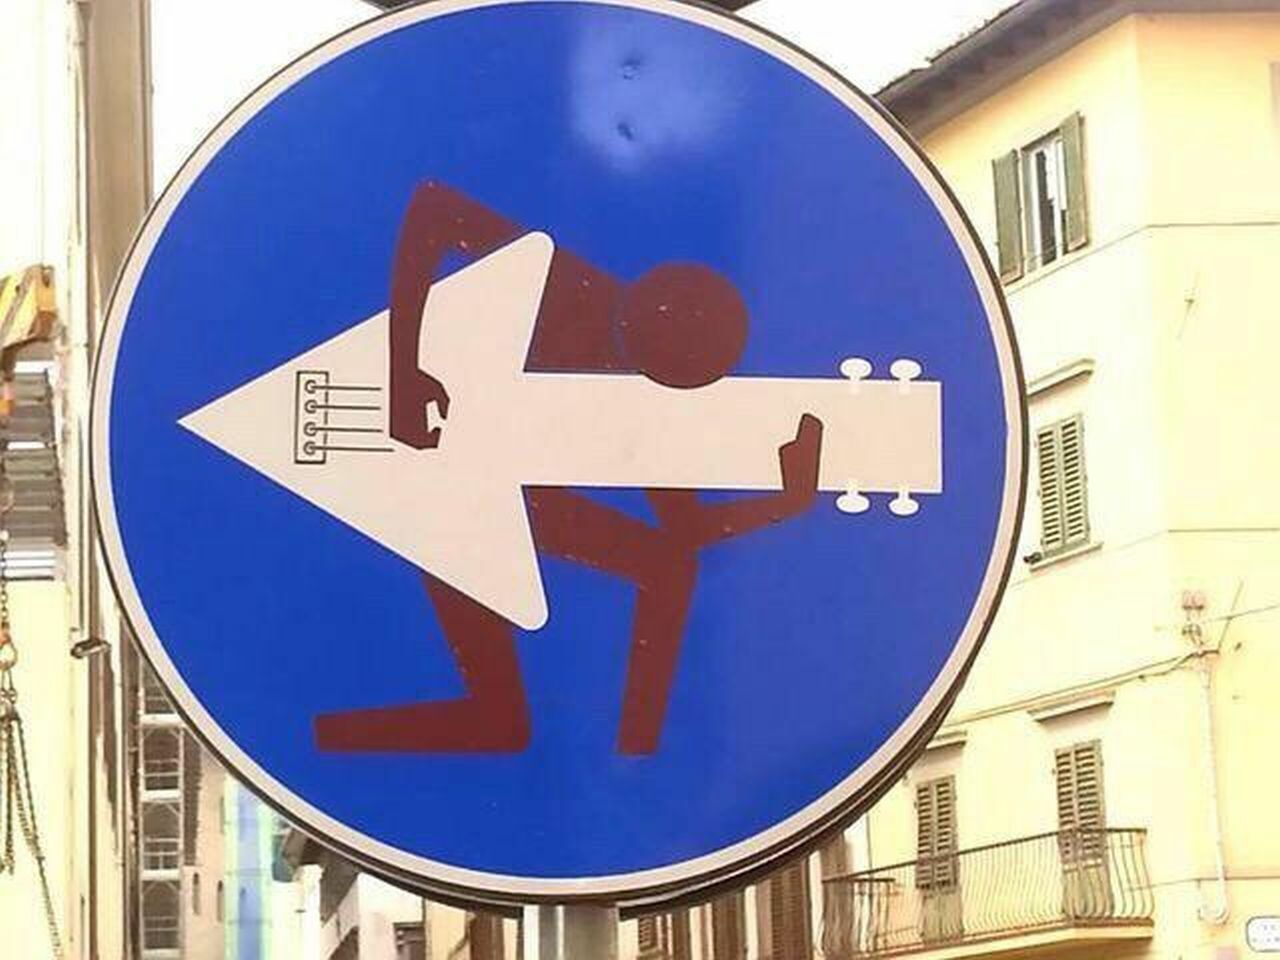 #StreetSignPranking #StreetArt Street artist #CletAbraham modified this street sign in less than 1 minute. https://t.co/KbYD3WKGFI